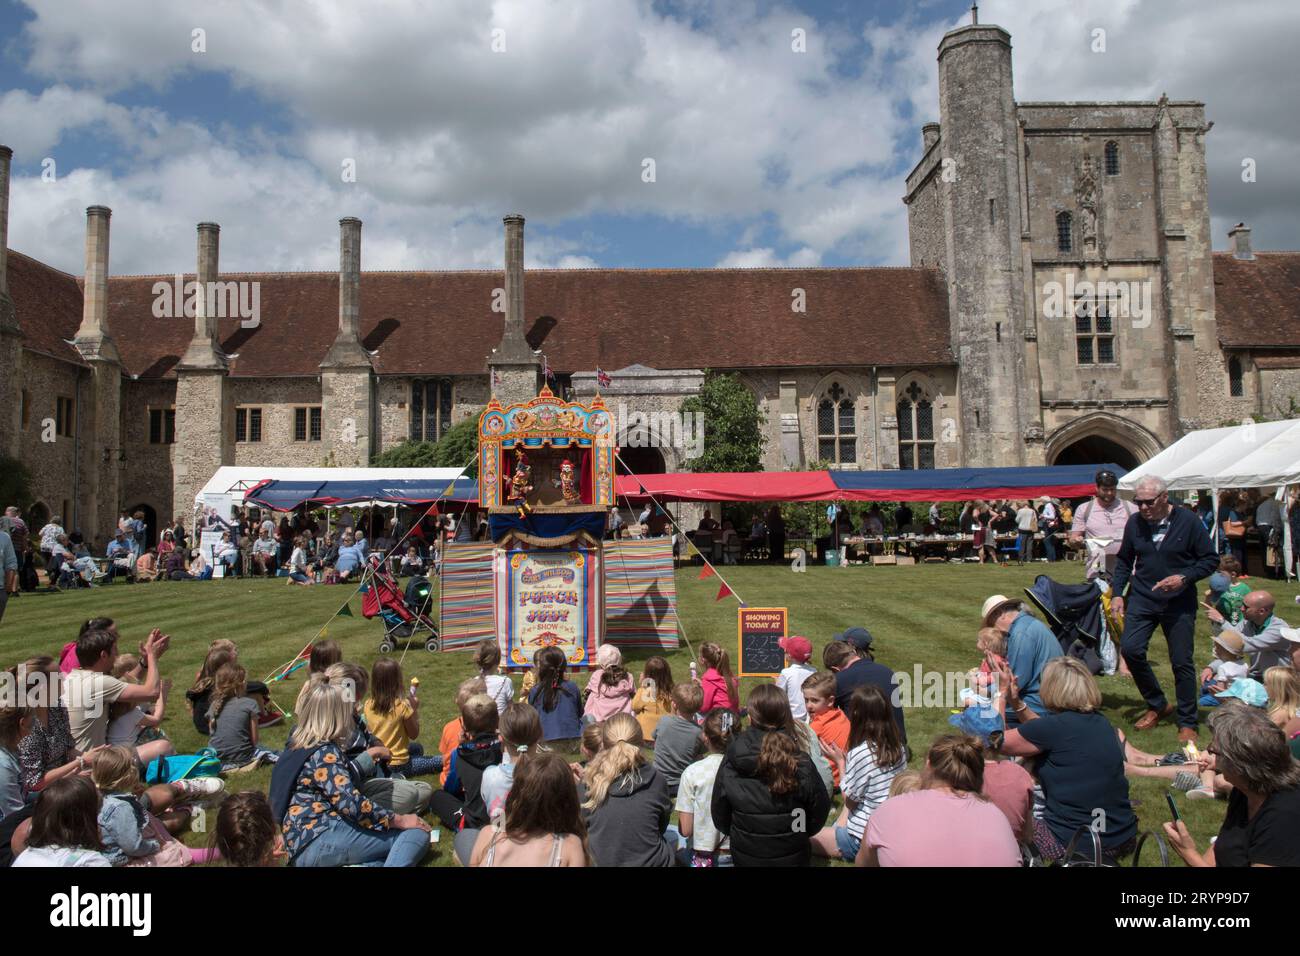 The Hospital of St Cross and Almshouse of Noble Poverty annual summer fete thats has taken place for over 150 years. About 2,000 people attended in 2022. Winchester, Hampshire, England 25th June 2022.  2020s UK HOMER SYKES Stock Photo